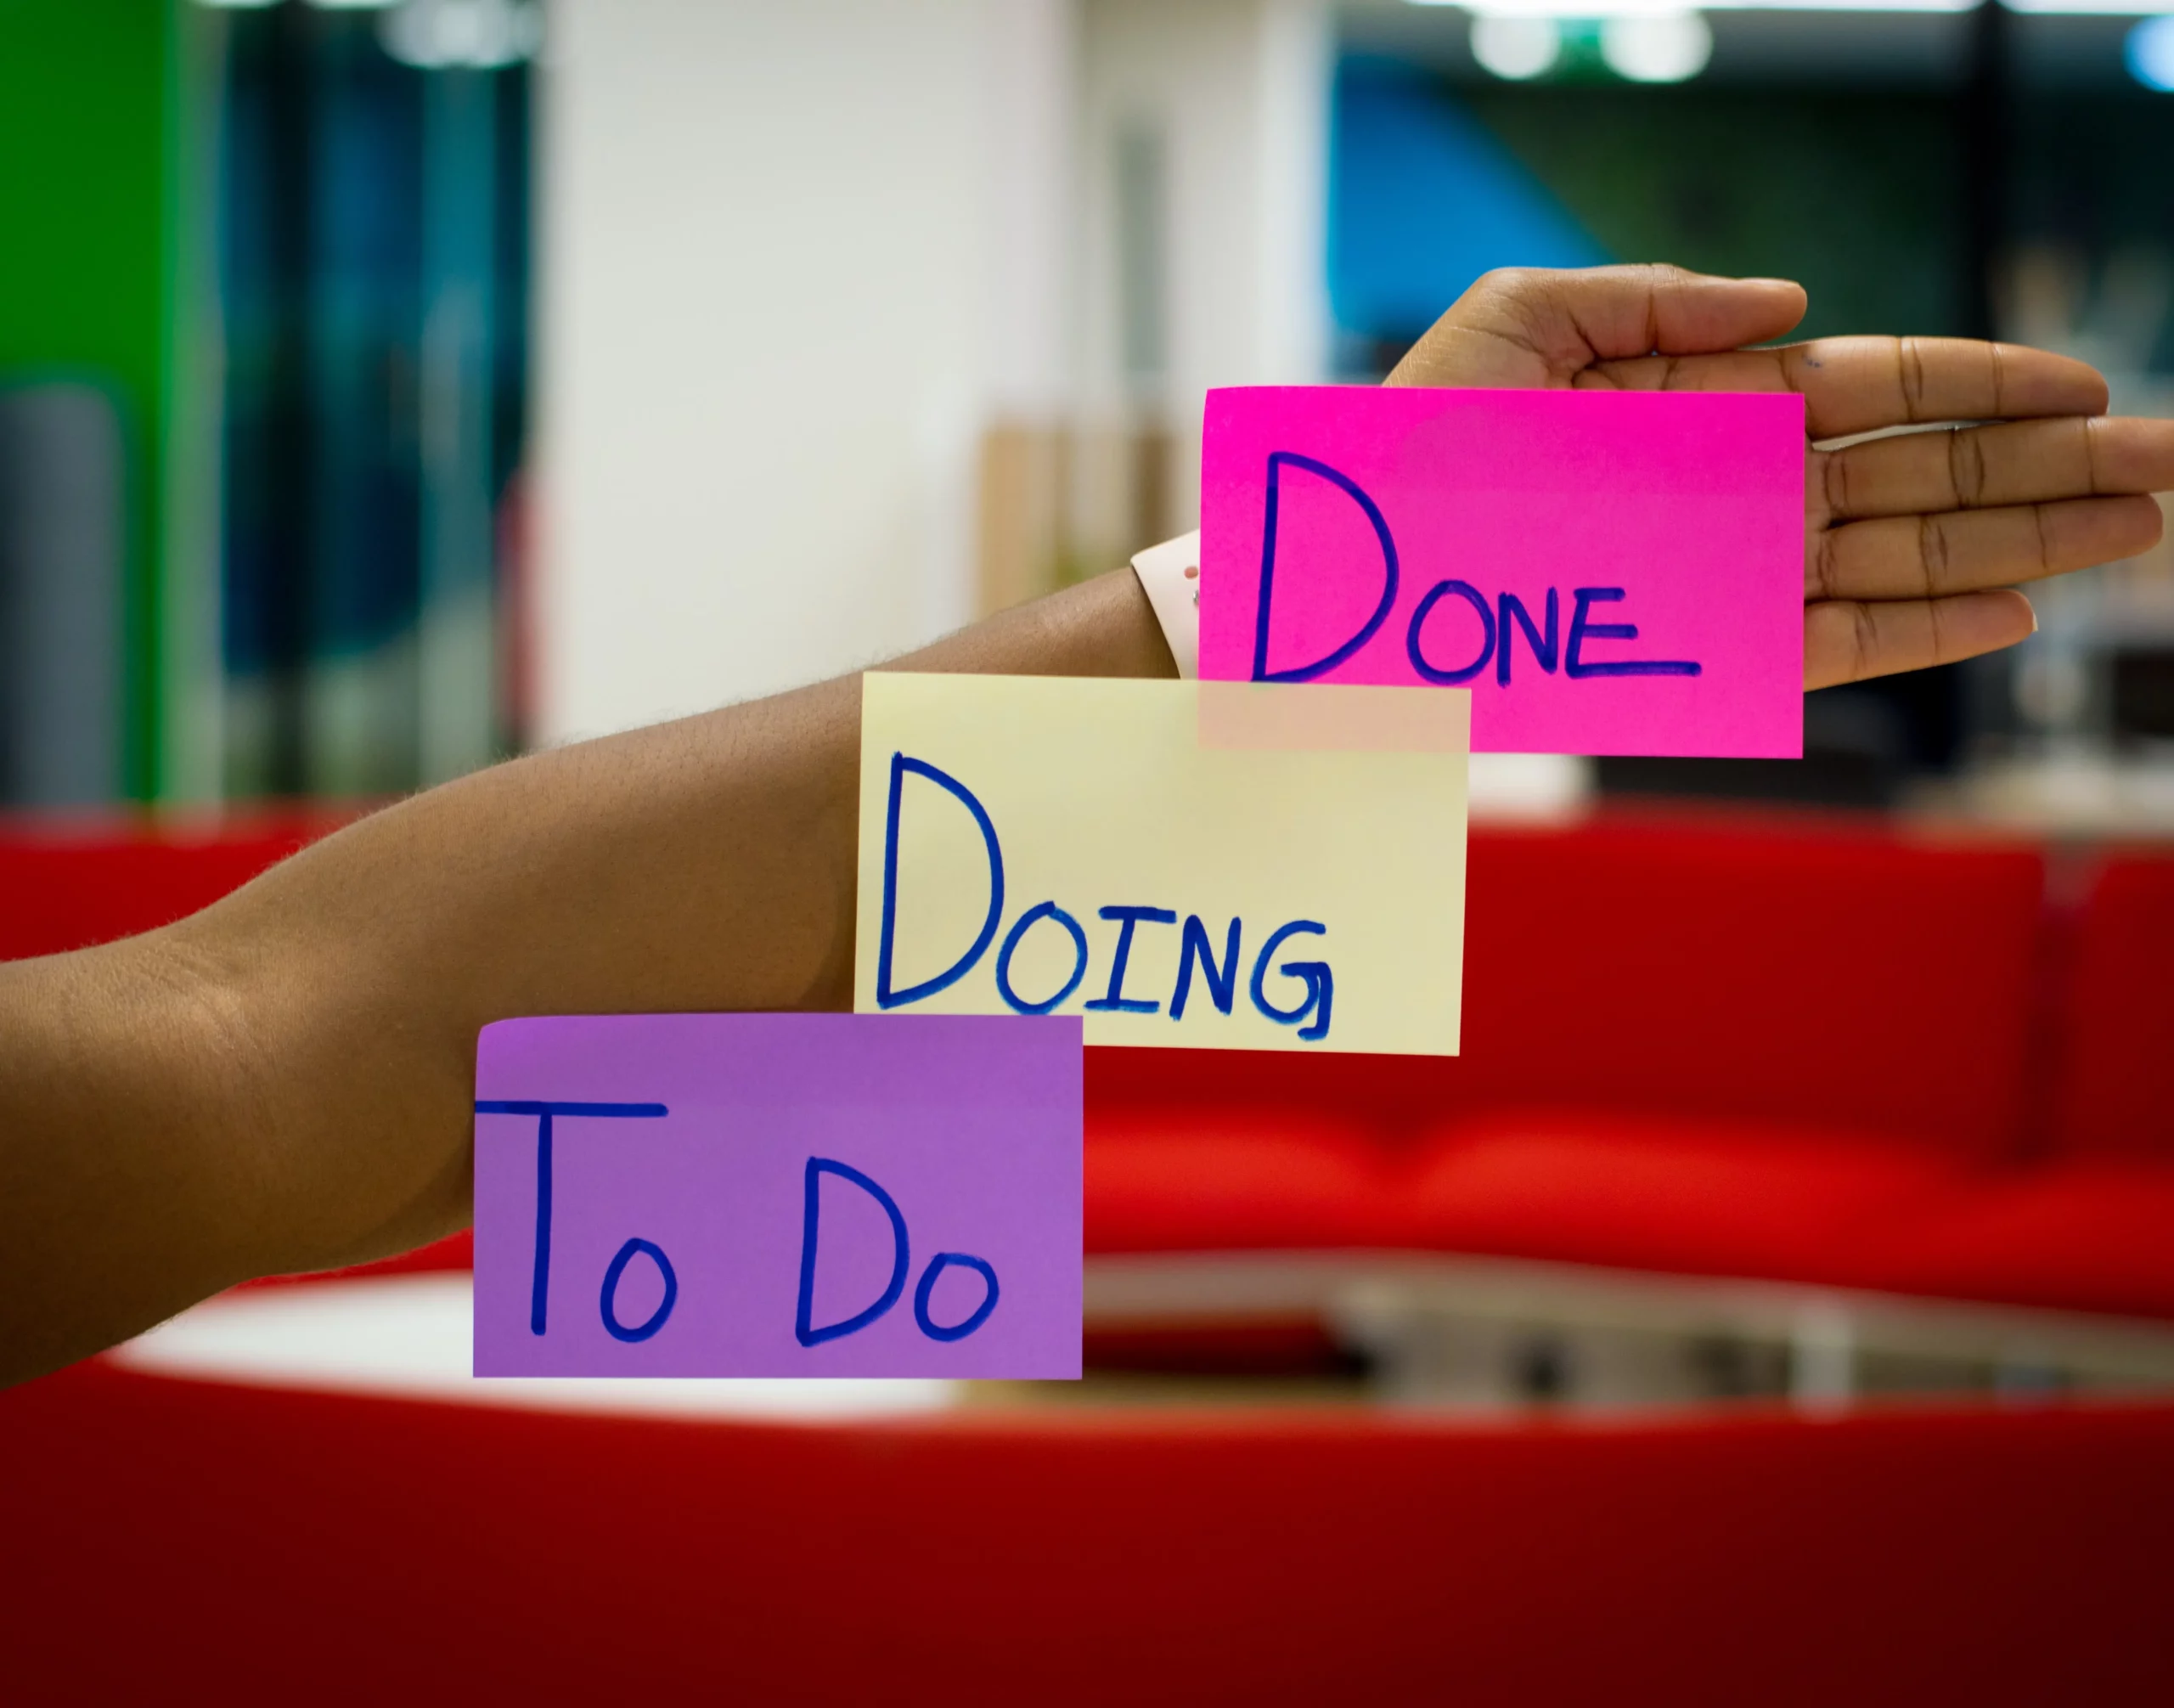 three post-it notes stuck to arm, reading "to do", "doing" and "done"